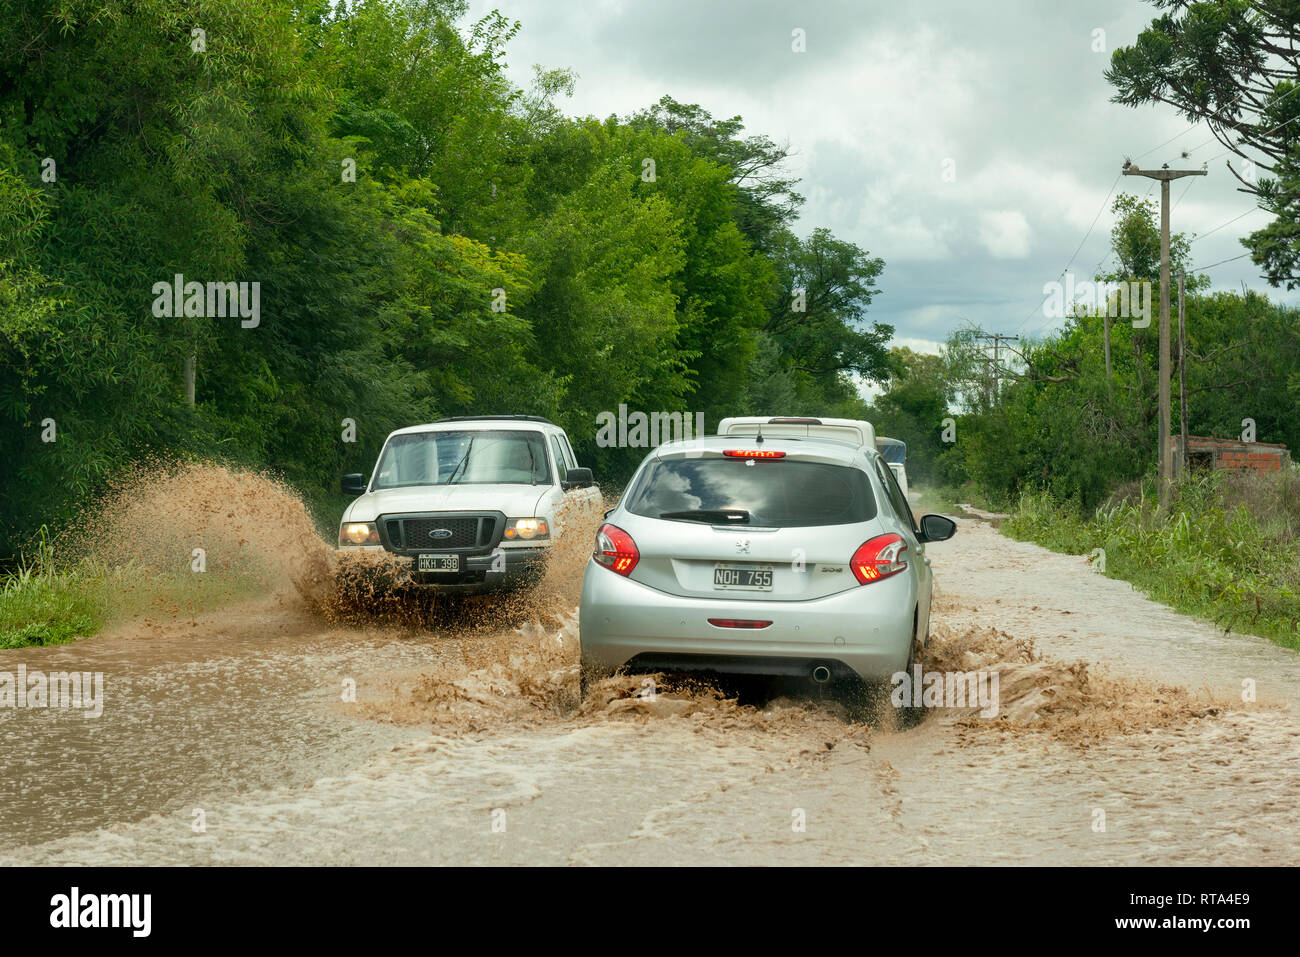 Traffic passing on a flooding affected road near El Carril, Salta Province, Argentina. Stock Photo